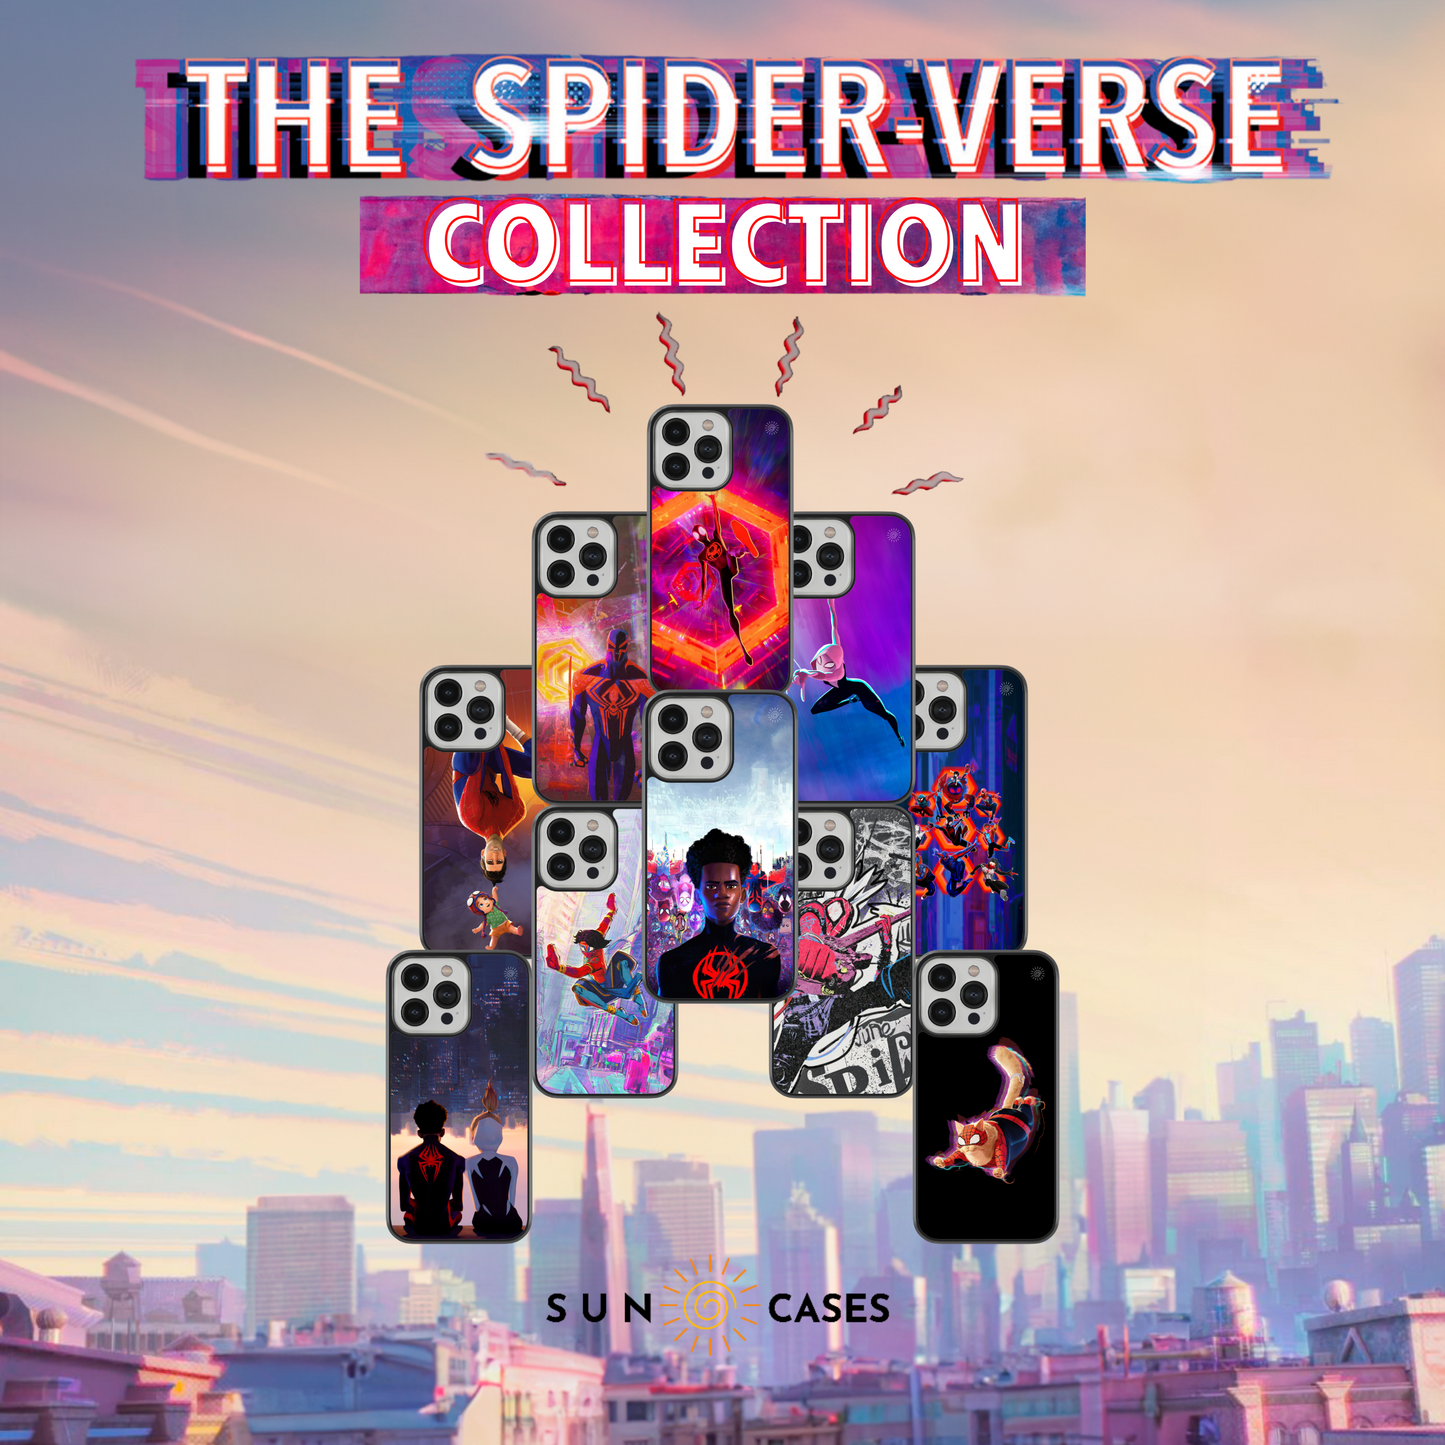 The Spider-Verse Collection - Miles and The Spider-Verse